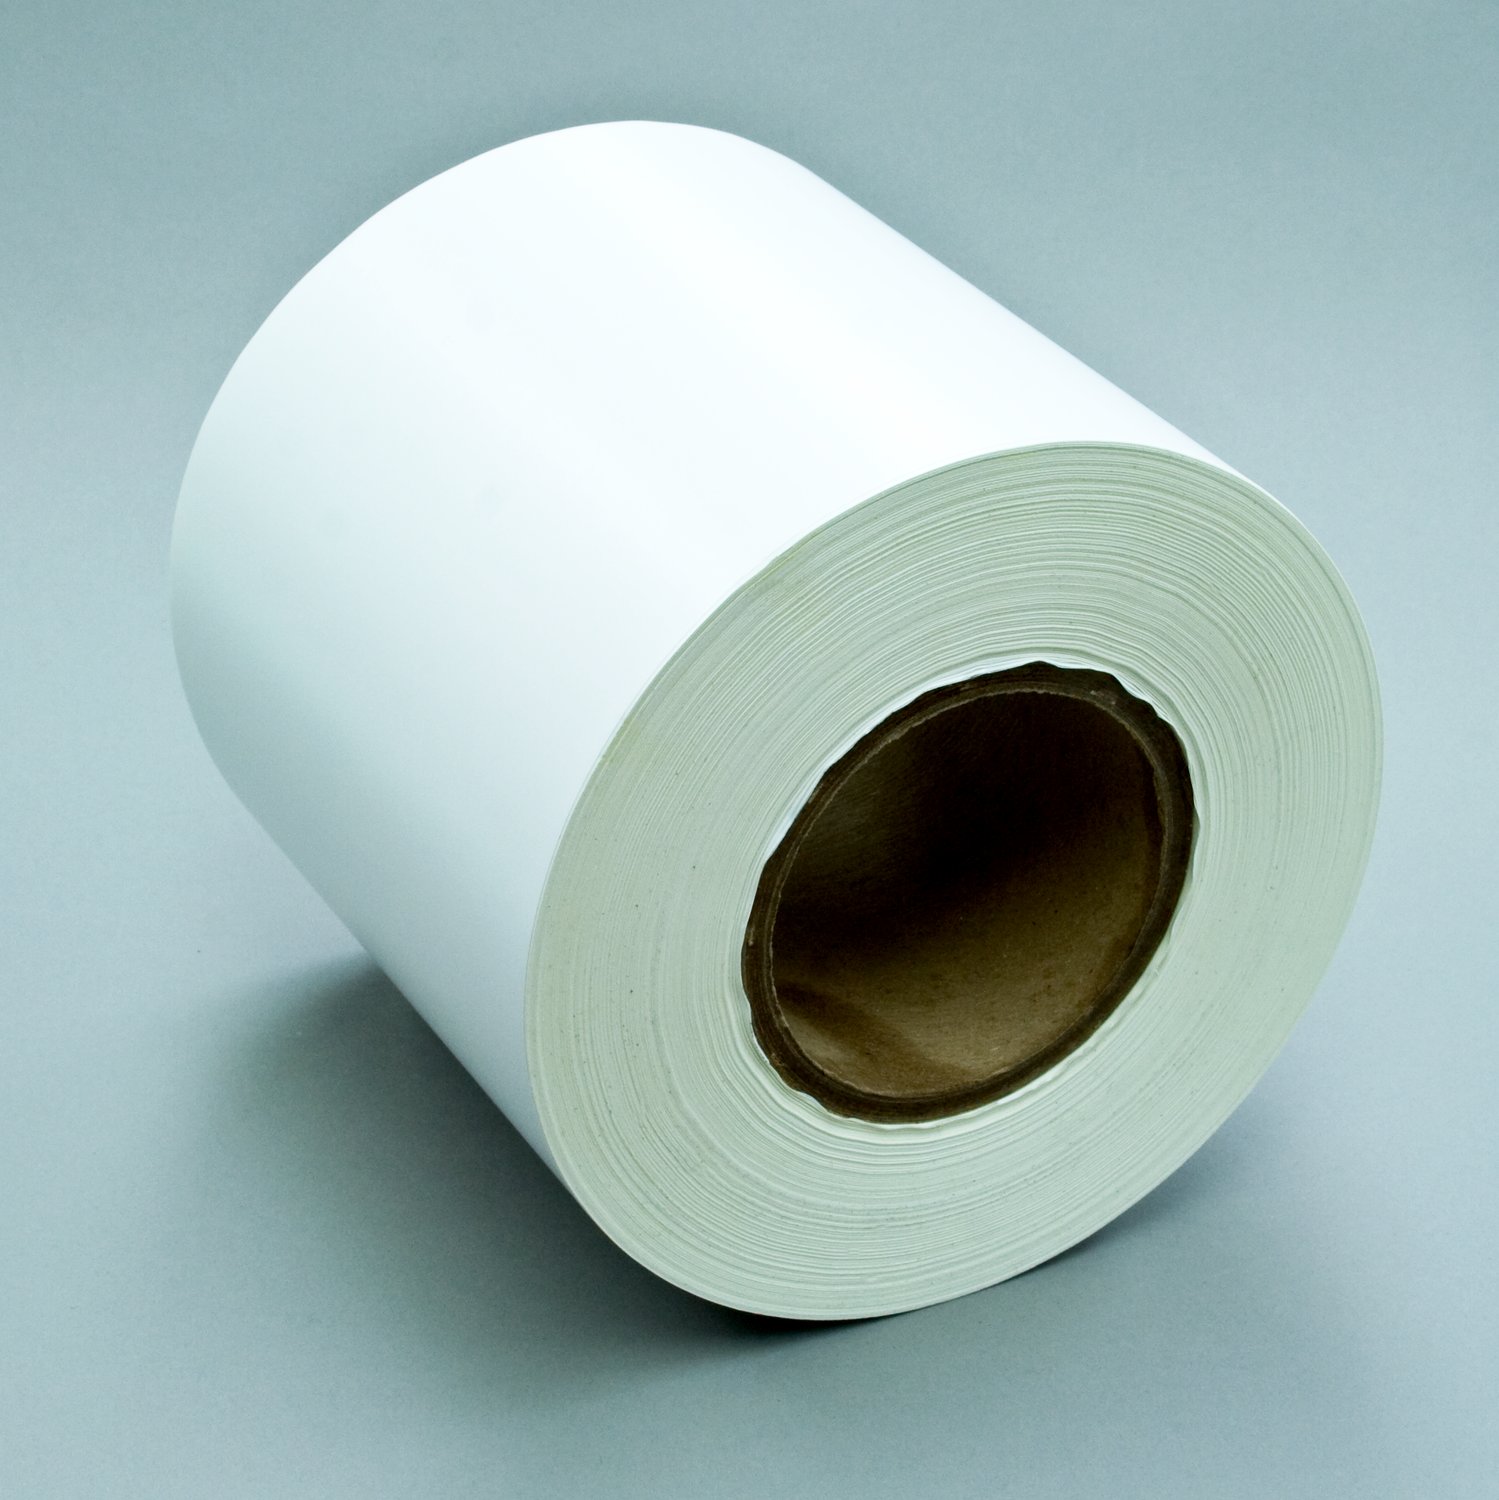 7010370286 - 3M Thermal Transfer Label Material OFV0202, Soft White Vinyl, 6 in x
1668 ft, 1 Roll/Case